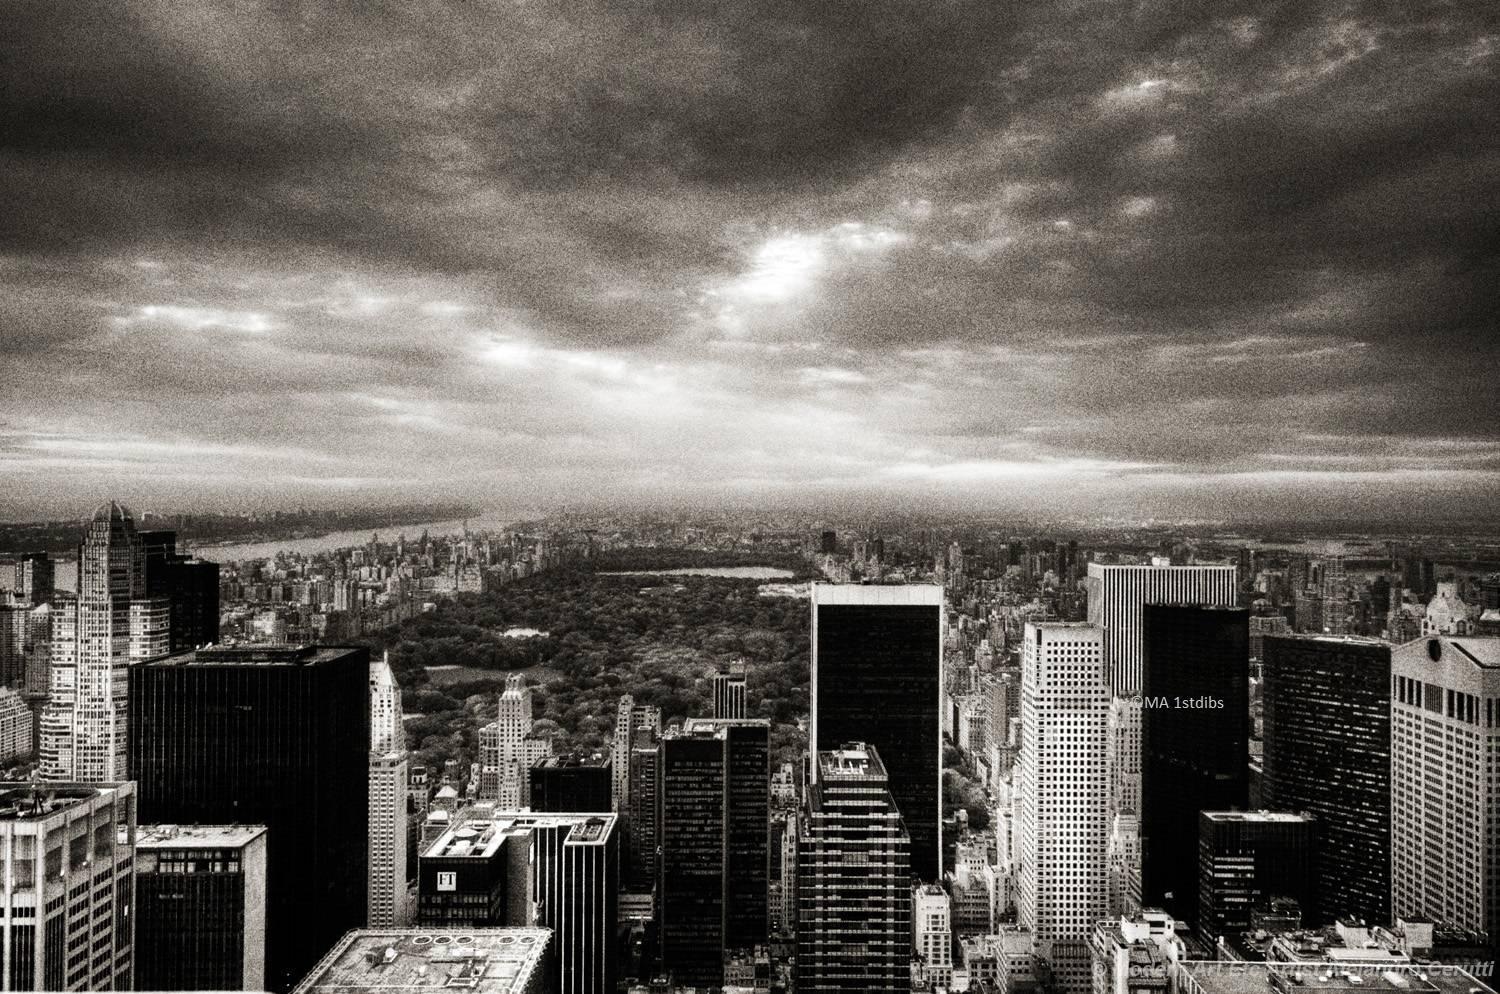 New York City black and white photo - New Yorker 30x45 in. Mounted acrylic glass - Contemporary Photograph by Alejandro Cerutti